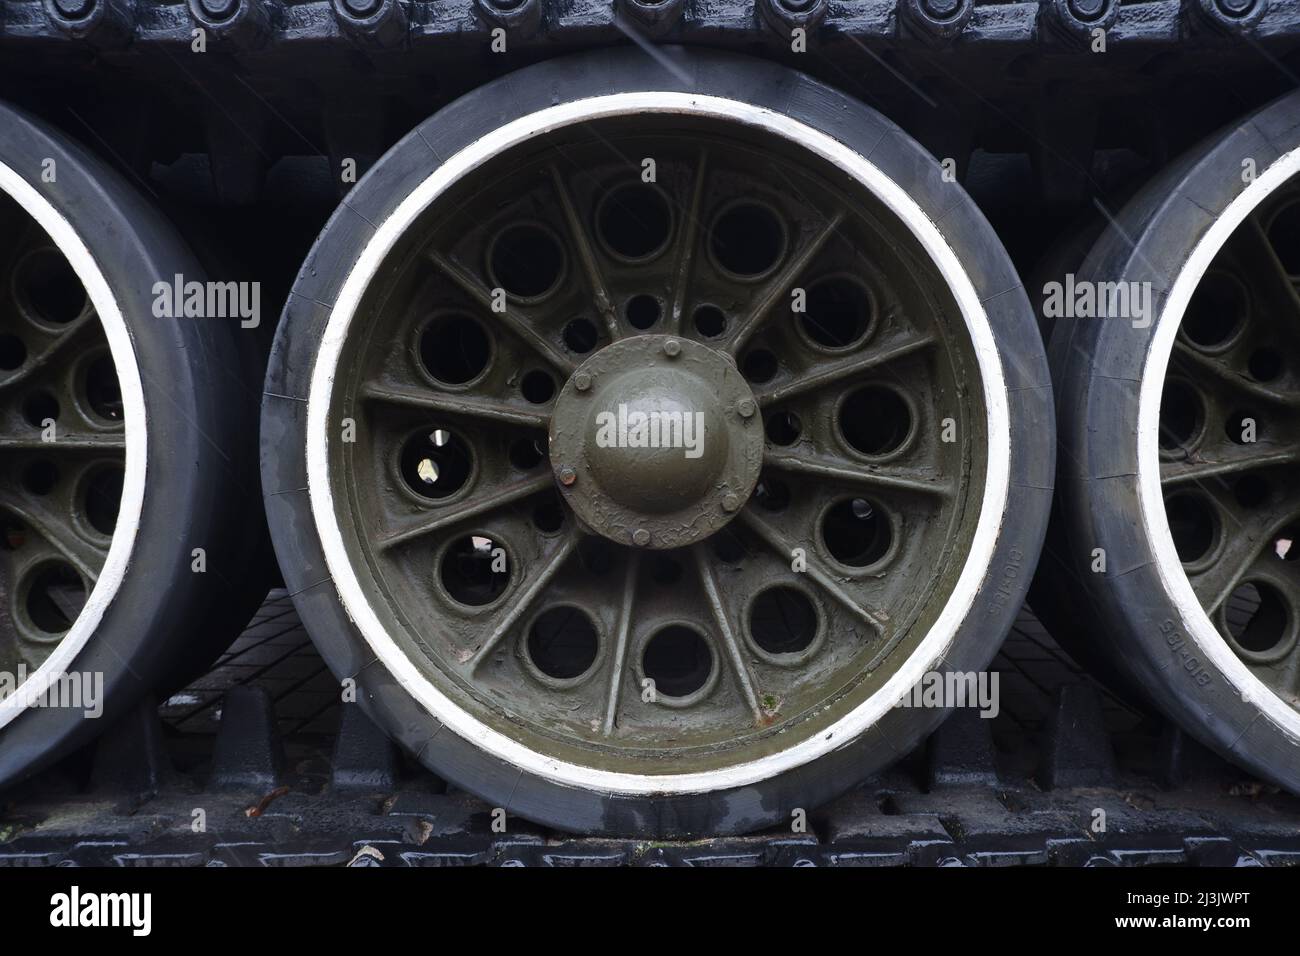 A fragment of the armored undercarriage of a tank with a caterpillar and wheels. Stock Photo